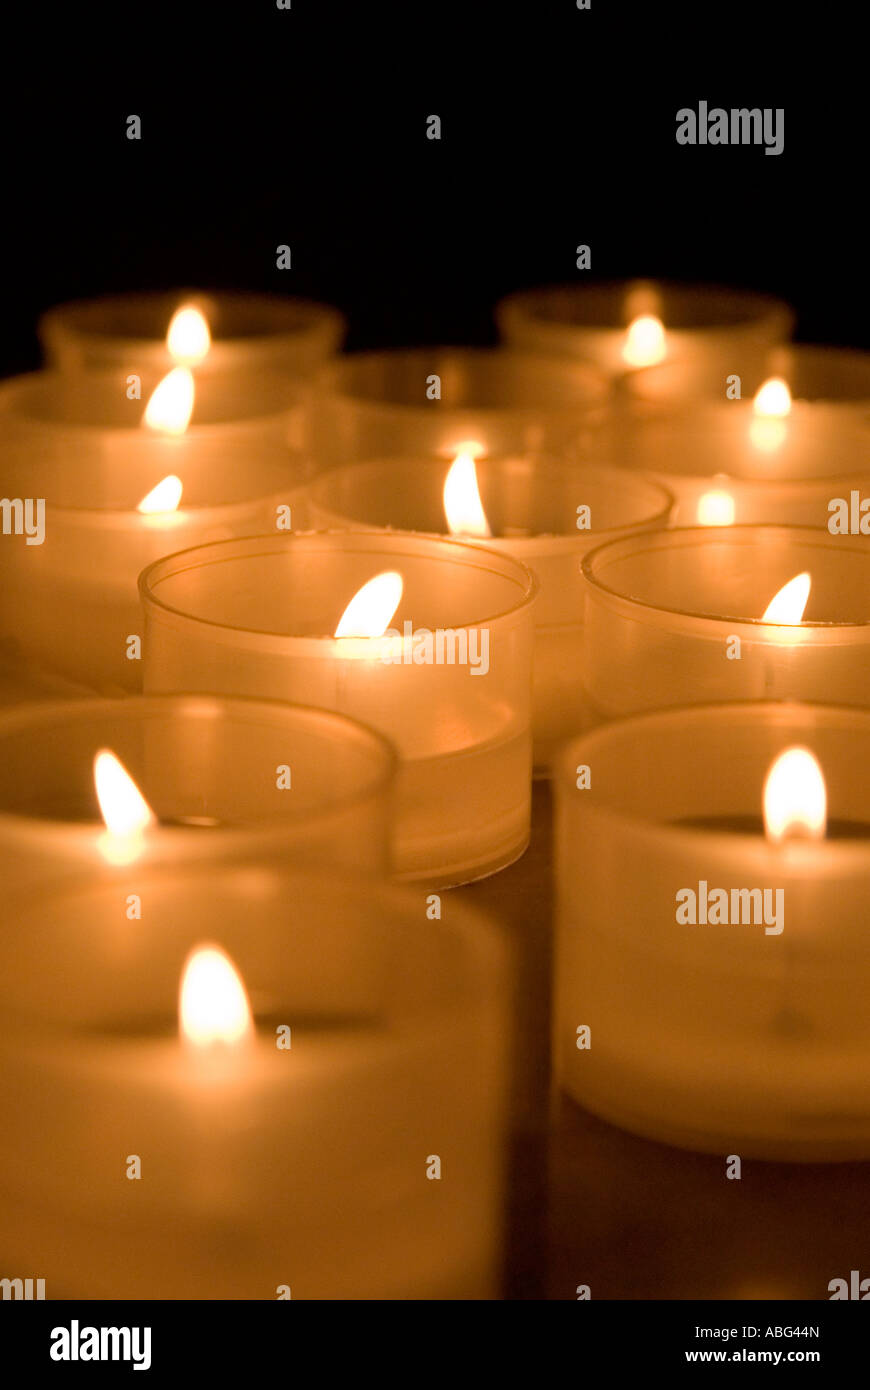 images of candles in churches in which a prayer is made and a candle lit to think about loved ones and others at christmas Stock Photo